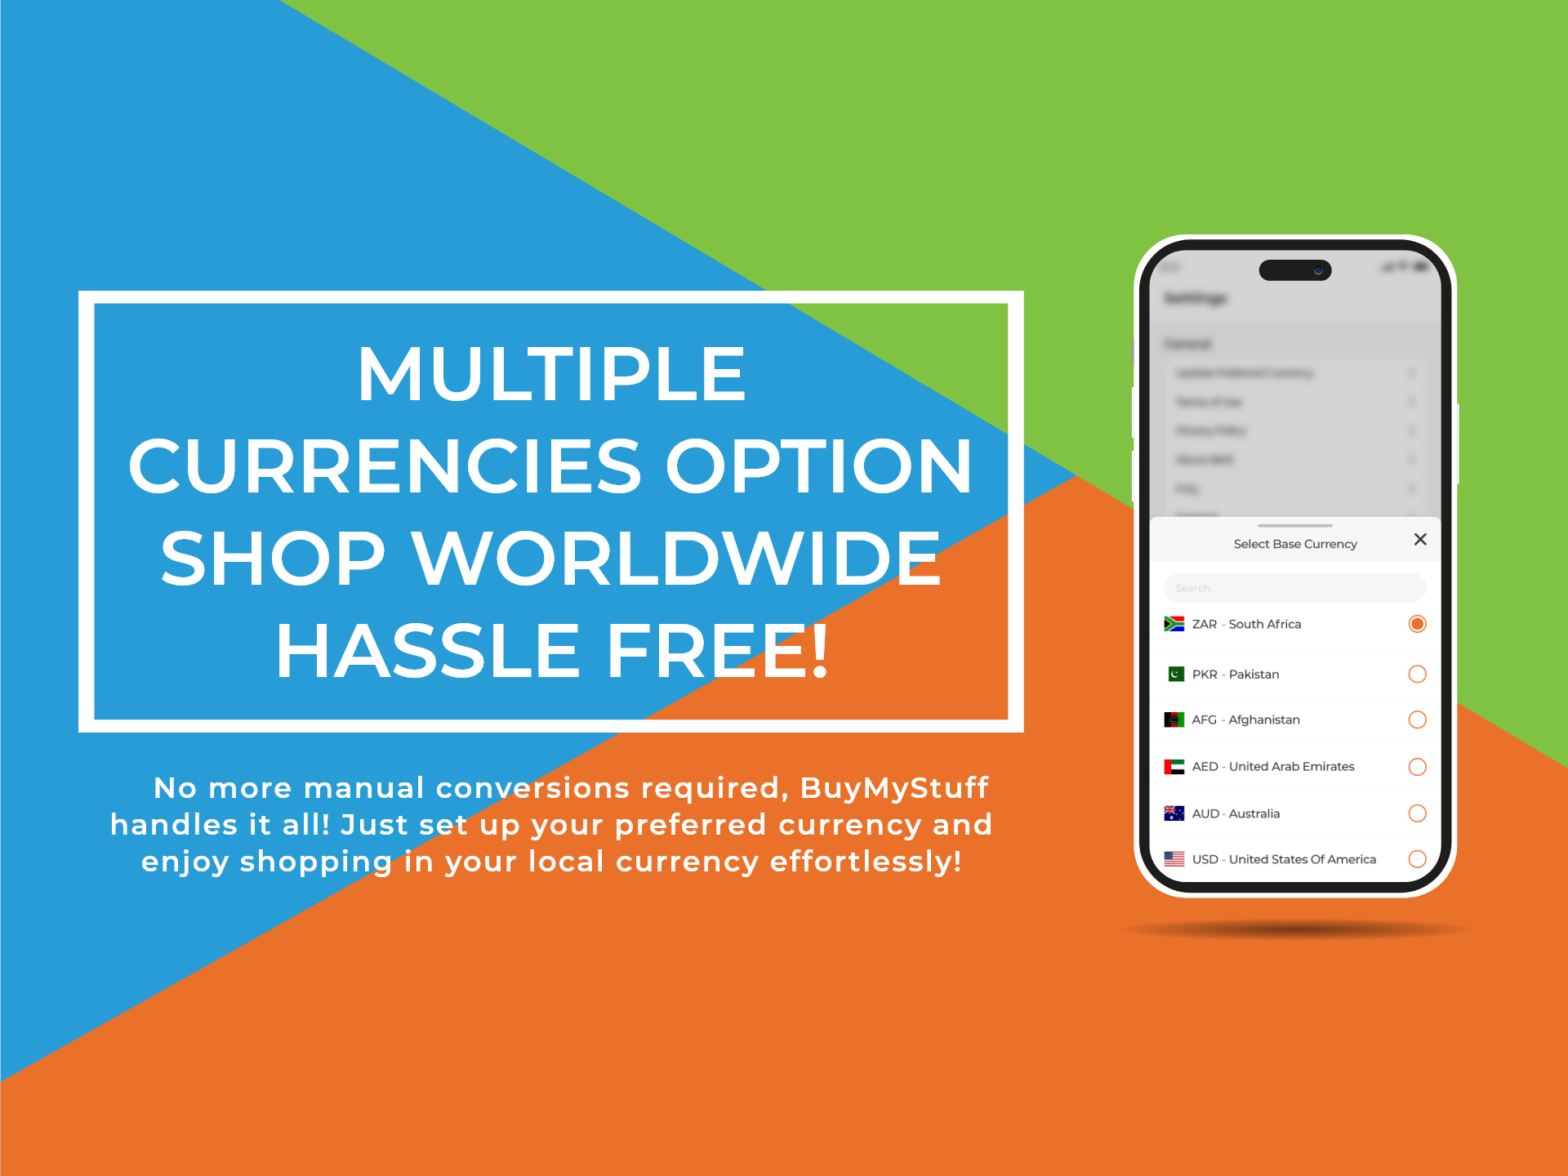 Shop All your favorite from anywhere in the world with the latest feature of Multiple Currency Options in One-Stop Shopping APP.